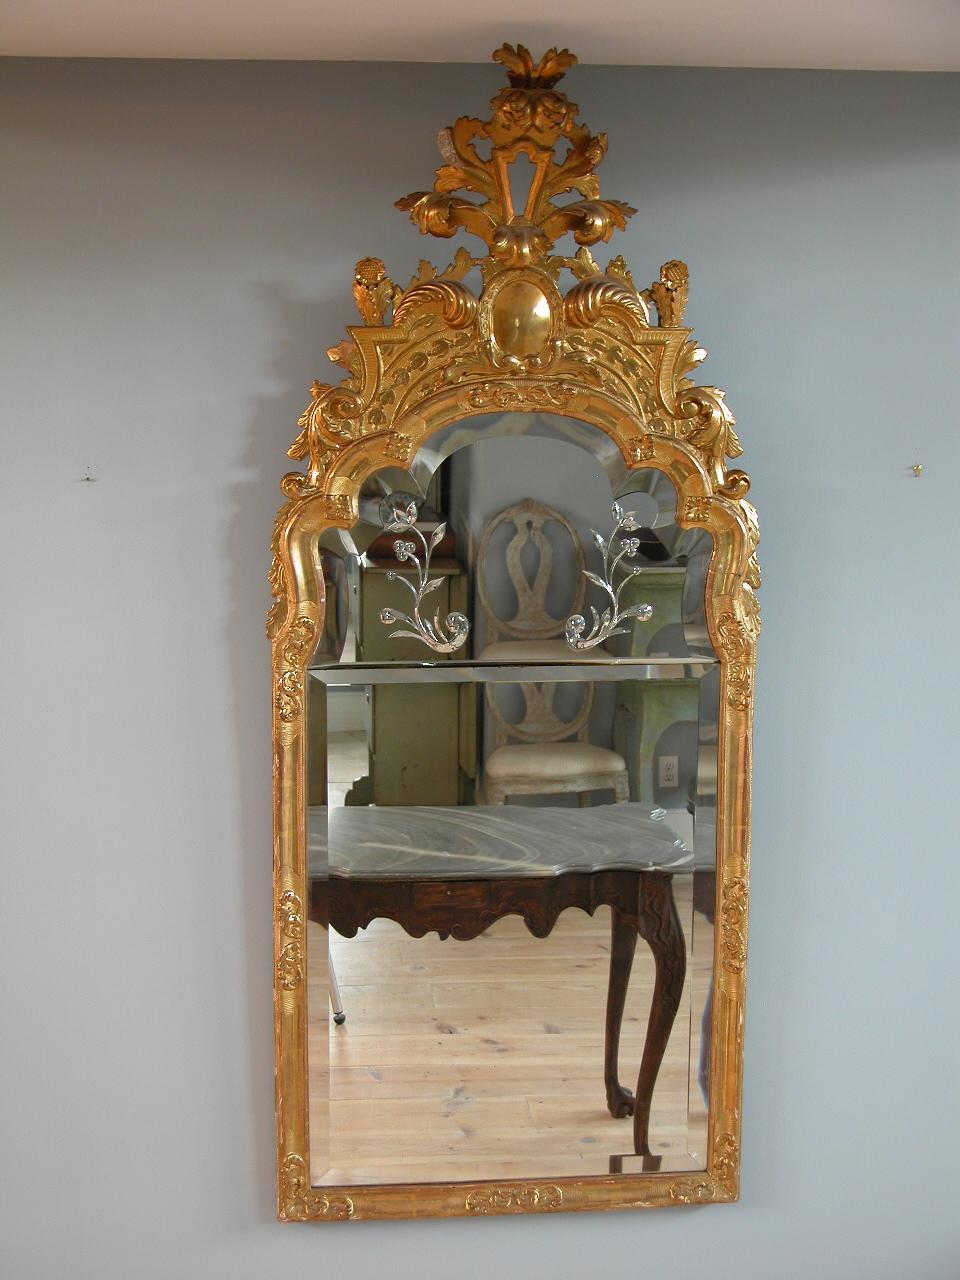 Burchard Precht (1651 Bremen, Germany - Stockholm 1738) attributed, Baroque Mirror, Origin: Stockholm, Sweden, circa 1710

Born and educated in Germany, Burchard Precht arrived in Stockholm in 1674 to work at Drottingholm Palace before being